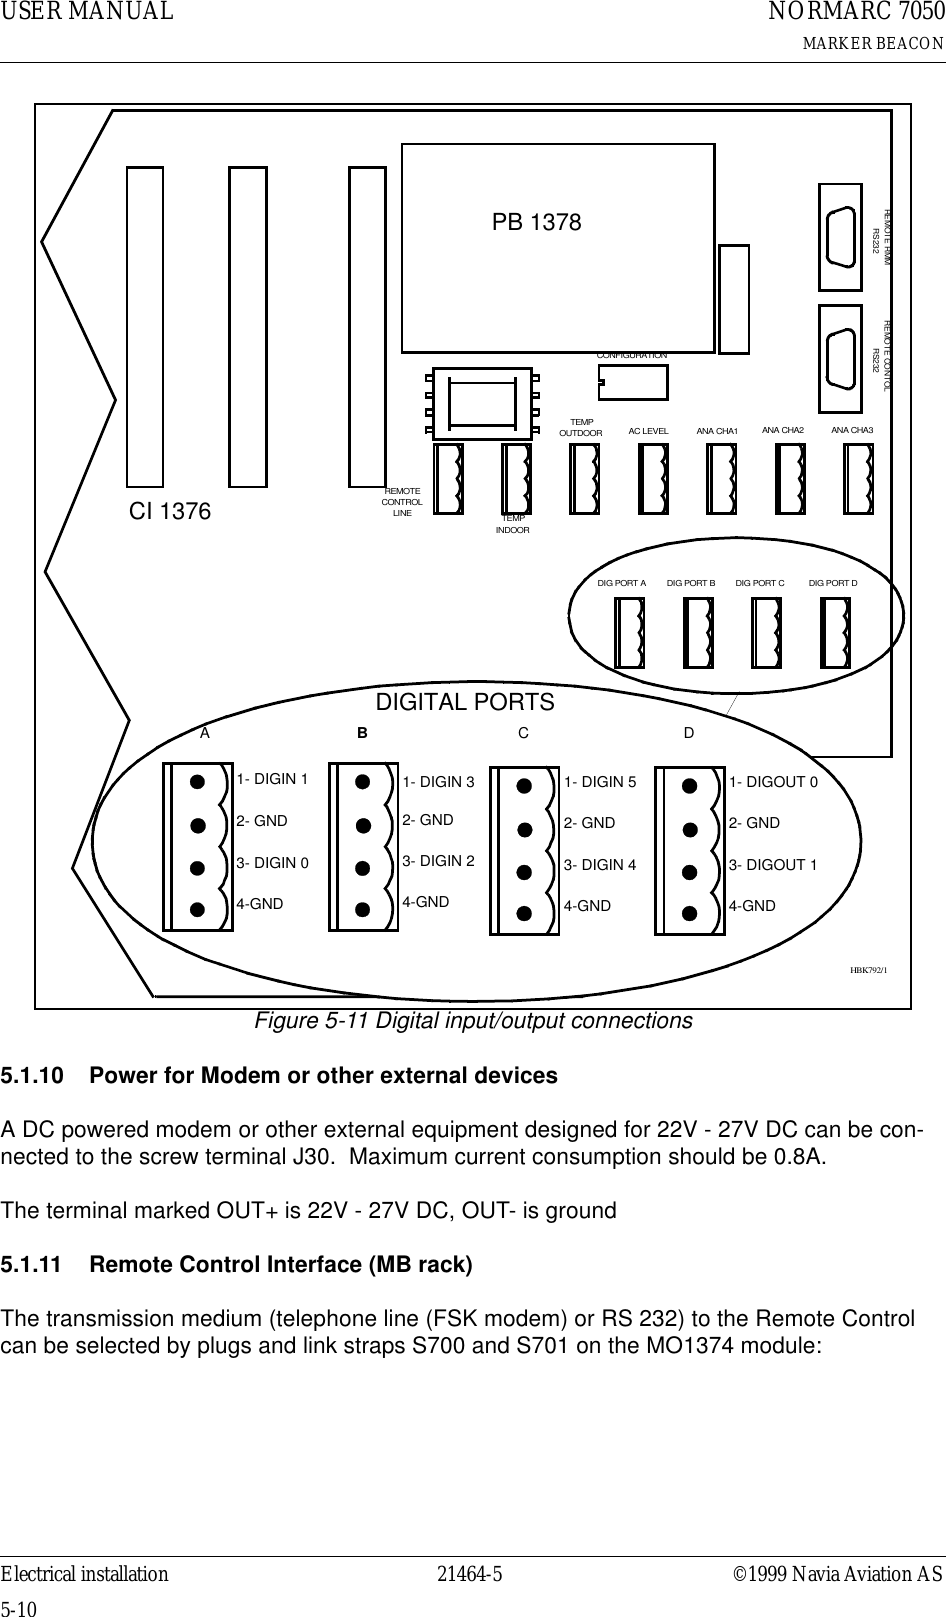 USER MANUAL5-1021464-5NORMARC 7050MARKER BEACONElectrical installation ©1999 Navia Aviation ASFigure 5-11 Digital input/output connections5.1.10 Power for Modem or other external devicesA DC powered modem or other external equipment designed for 22V - 27V DC can be con-nected to the screw terminal J30.  Maximum current consumption should be 0.8A.The terminal marked OUT+ is 22V - 27V DC, OUT- is ground5.1.11 Remote Control Interface (MB rack)The transmission medium (telephone line (FSK modem) or RS 232) to the Remote Control can be selected by plugs and link straps S700 and S701 on the MO1374 module:1- DIGIN 12- GND3- DIGIN 04-GND1- DIGIN 32- GND3- DIGIN 24-GND1- DIGIN 52- GND3- DIGIN 44-GND1- DIGOUT 02- GND3- DIGOUT 14-GNDDIGITAL PORTSABCDCI 1376PB 1378REMOTECONTROLLINETEMPOUTDOORTEMPINDOORAC LEVEL ANA CHA1 ANA CHA2 ANA CHA3REMOTE RMMRS232REMOTE CONTOLRS232CONFIGURATIONDIG PORT A DIG PORT B DIG PORT C DIG PORT DHBK792/1